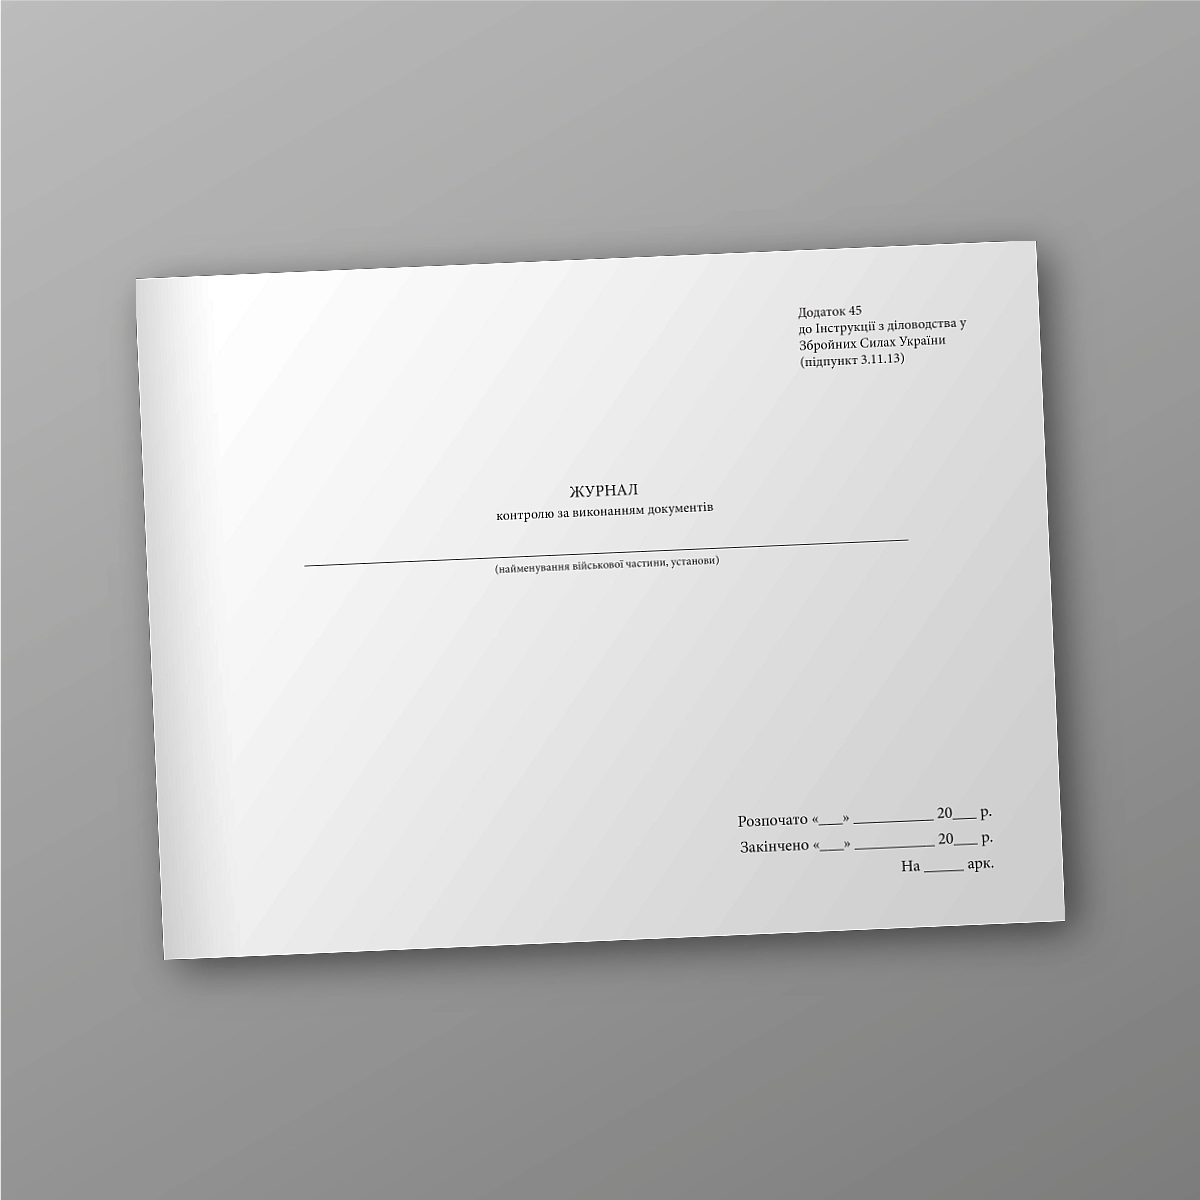 Document control journal | PrintTo: